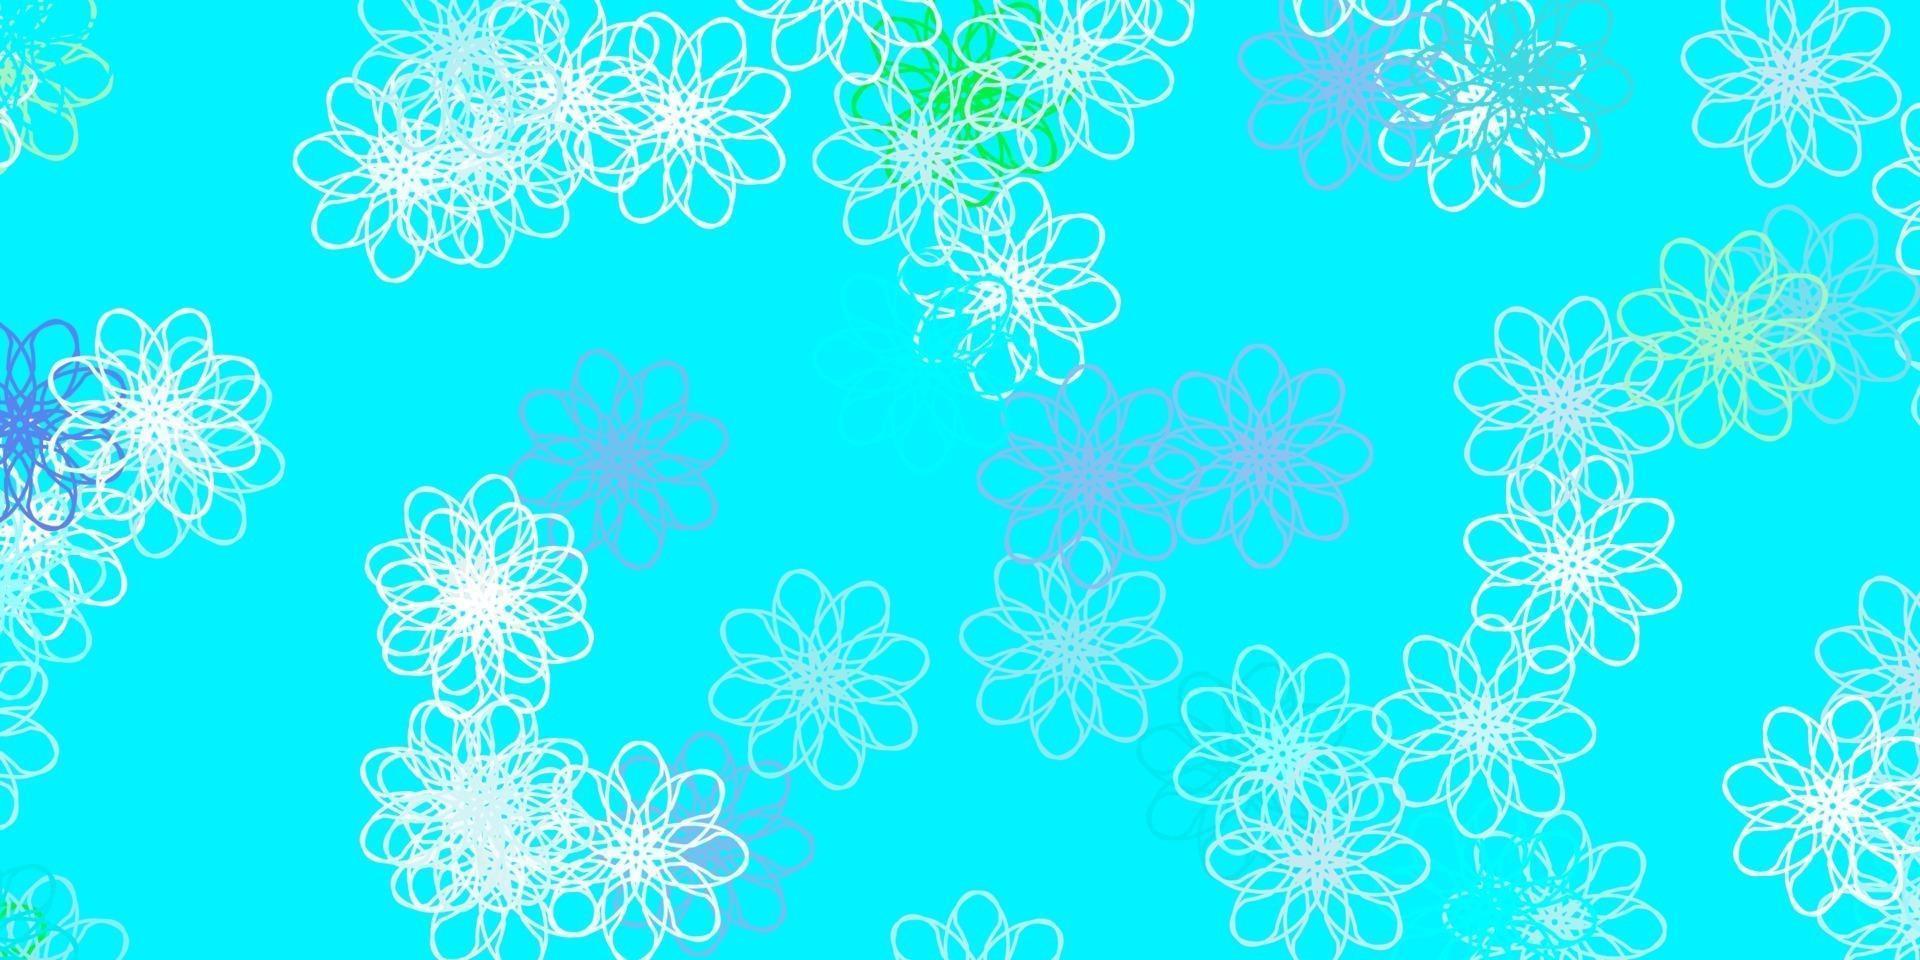 Light Blue, Green vector doodle pattern with flowers.